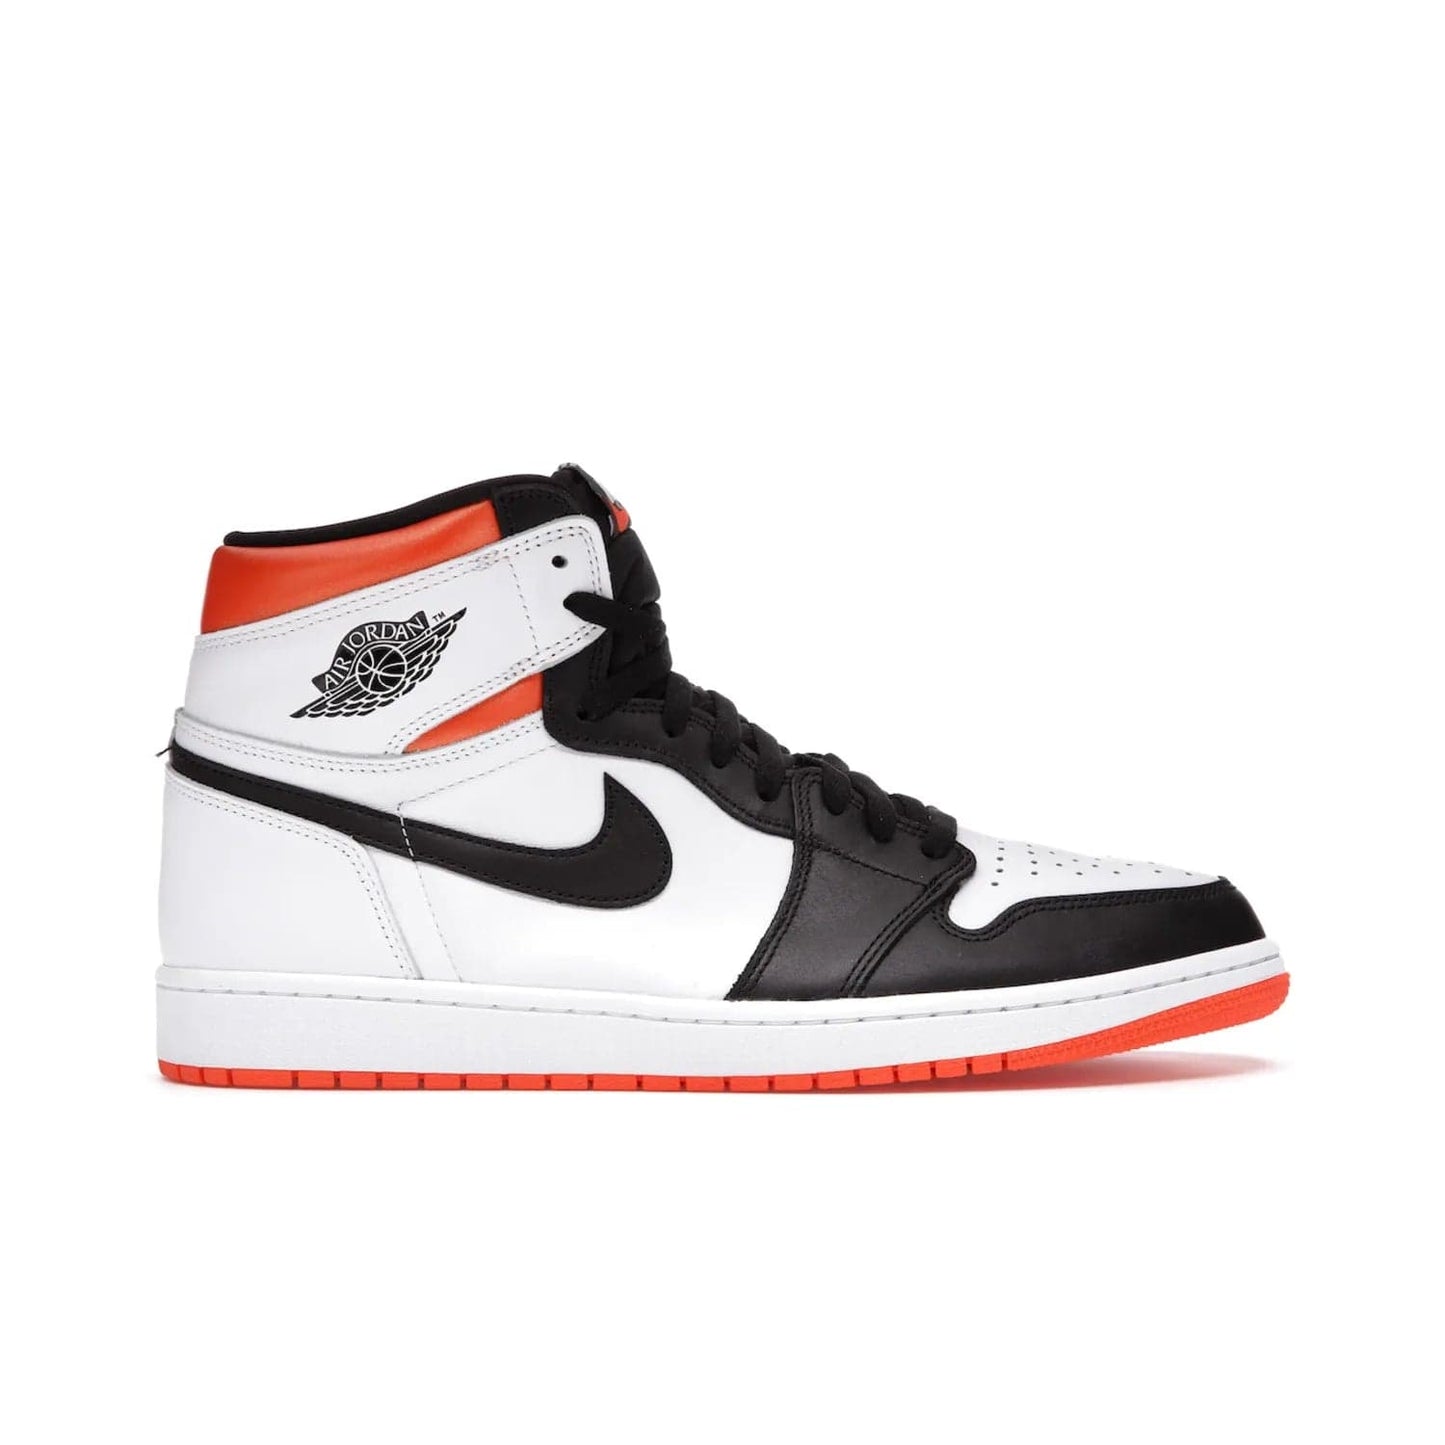 Jordan 1 Retro High Electro Orange - Image 1 - Only at www.BallersClubKickz.com - This Air Jordan 1 Retro High Electro Orange features a white leather upper with black overlays and vibrant Hyper Orange ankle wrap. Turn heads with this iconic design of woven tongue label and sole. Get yours today and add some serious style to your rotation.